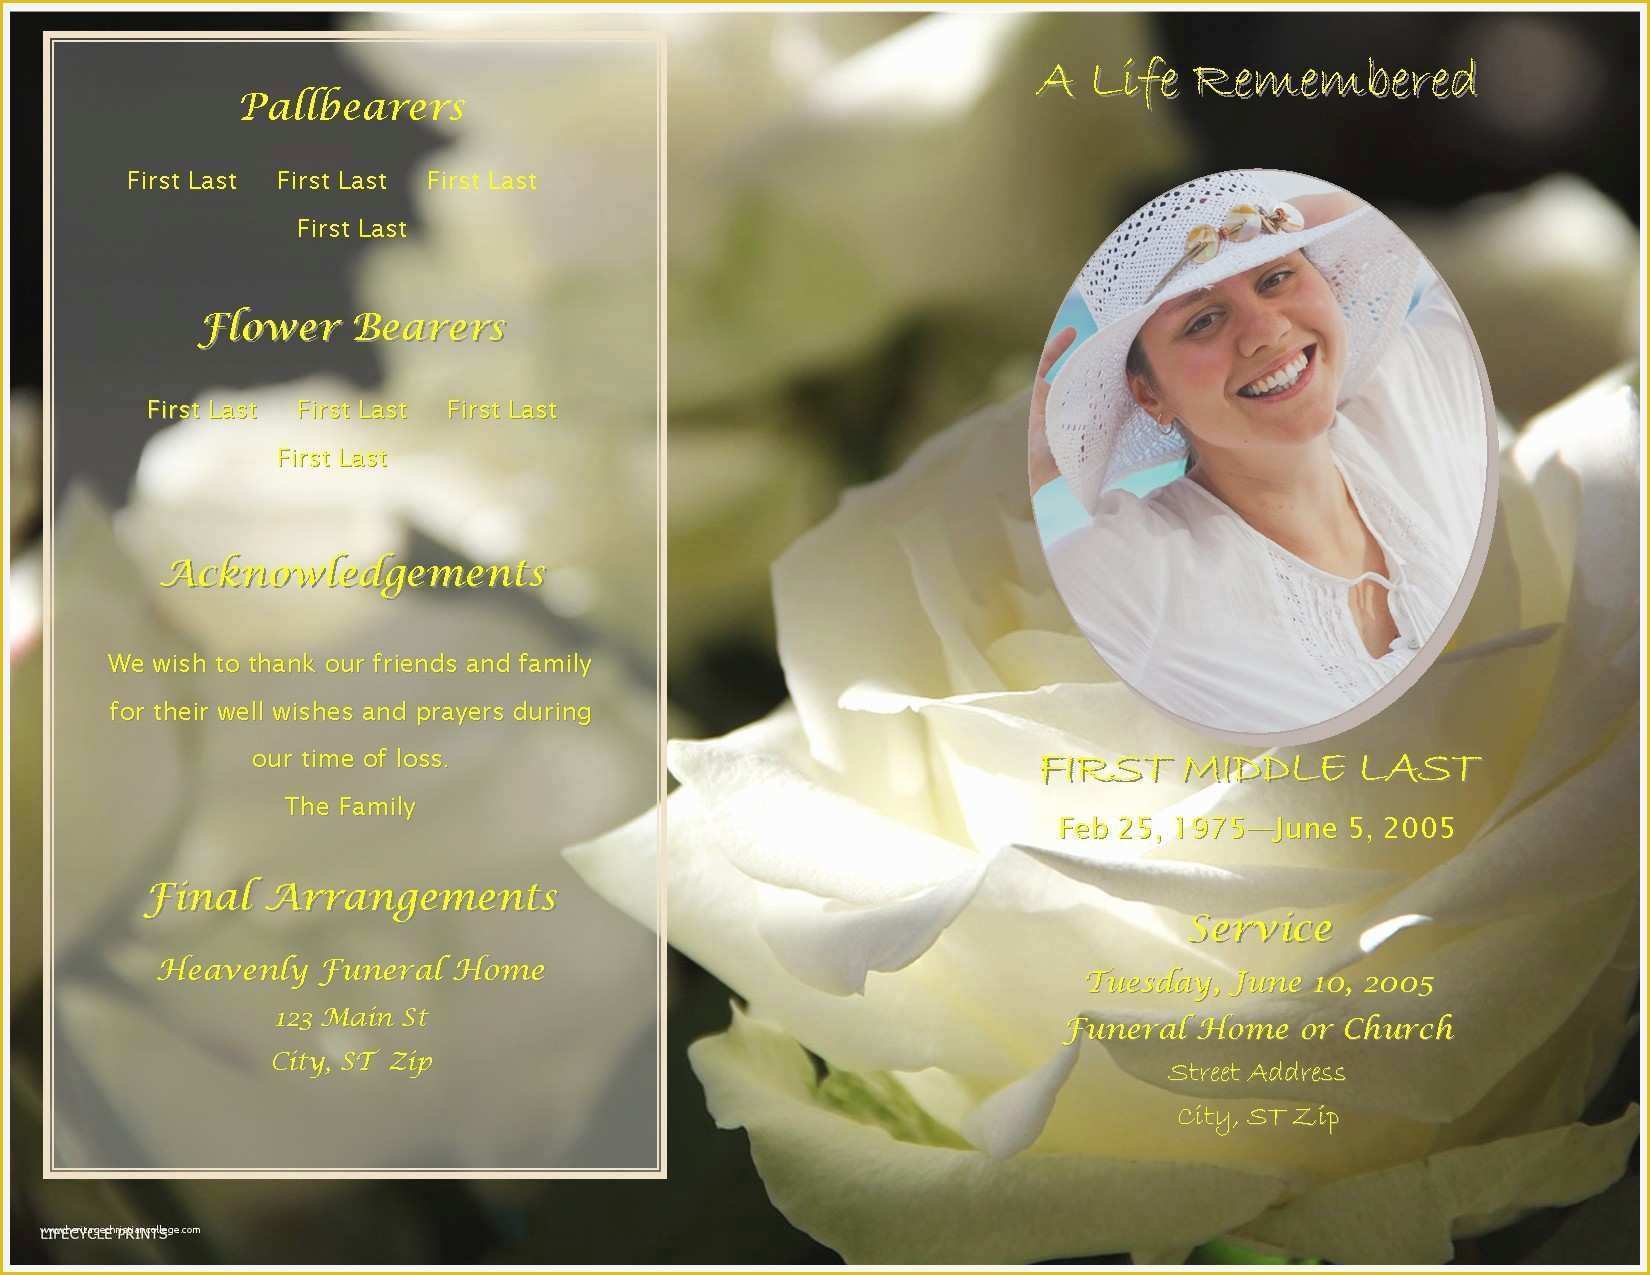 Free Obituary Program Template Download Of Beautiful Free Obituary Program Template Download